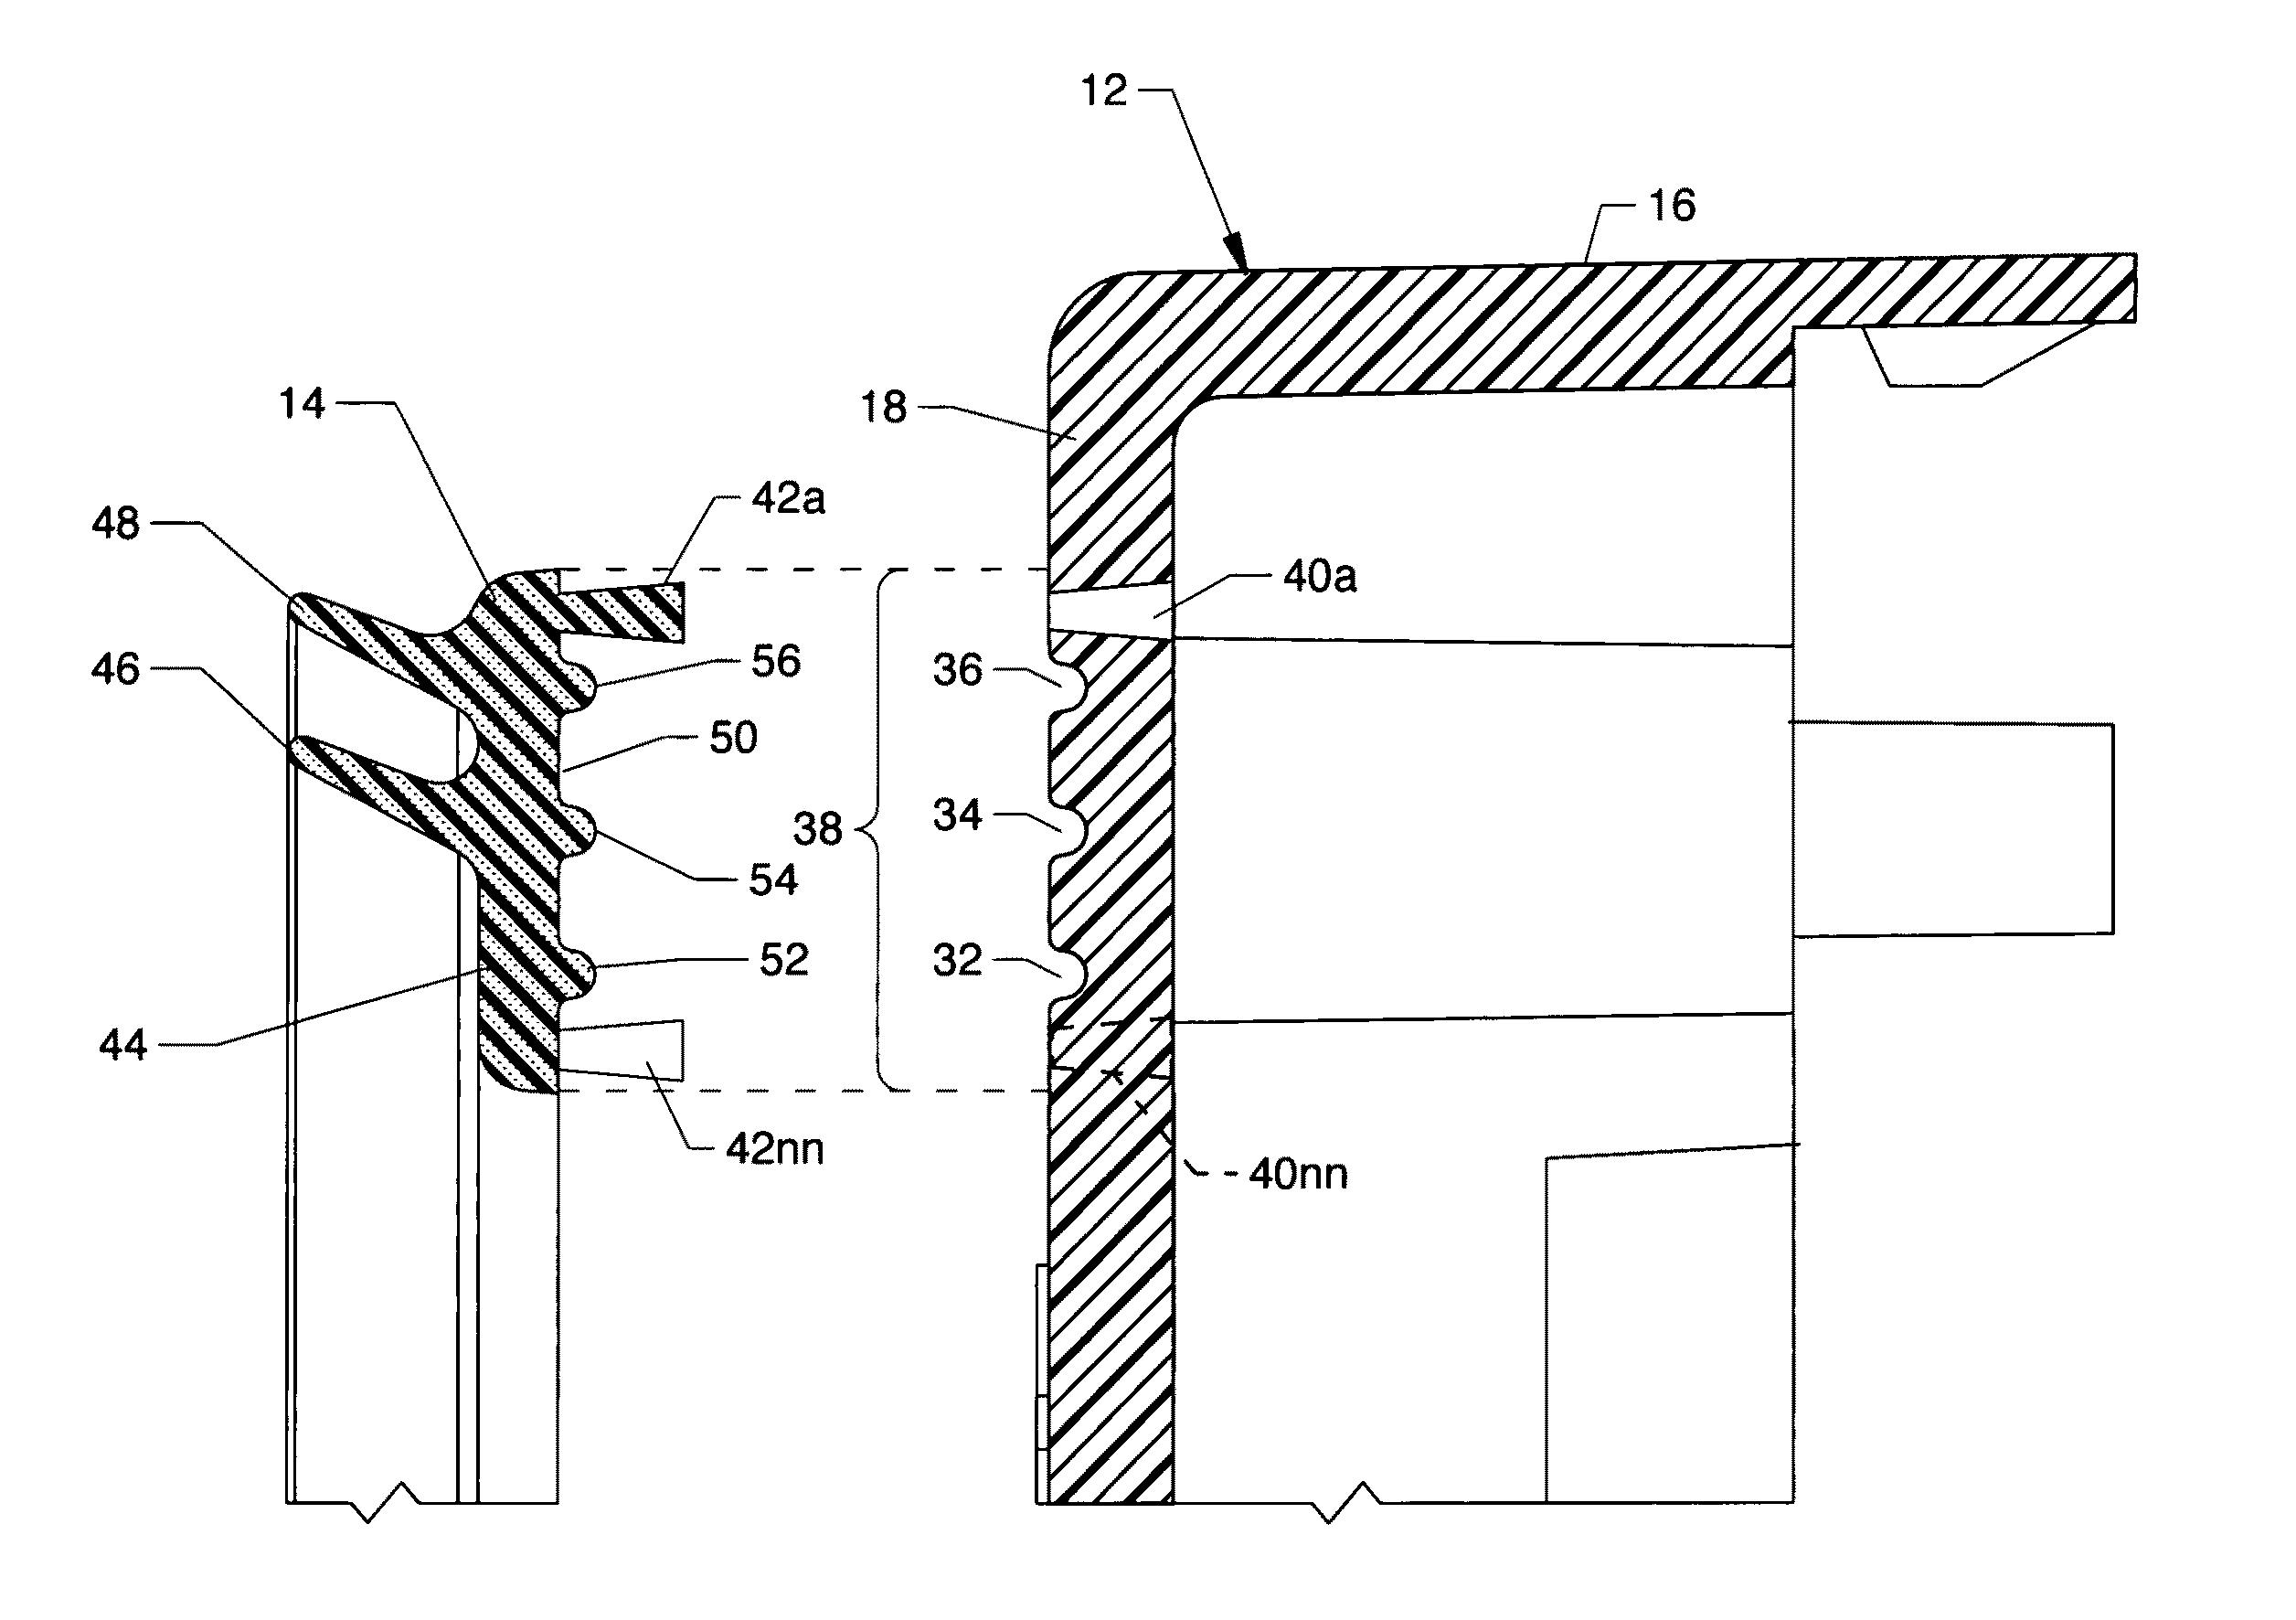 Electronic sign module housing having an overmolded gasket seal